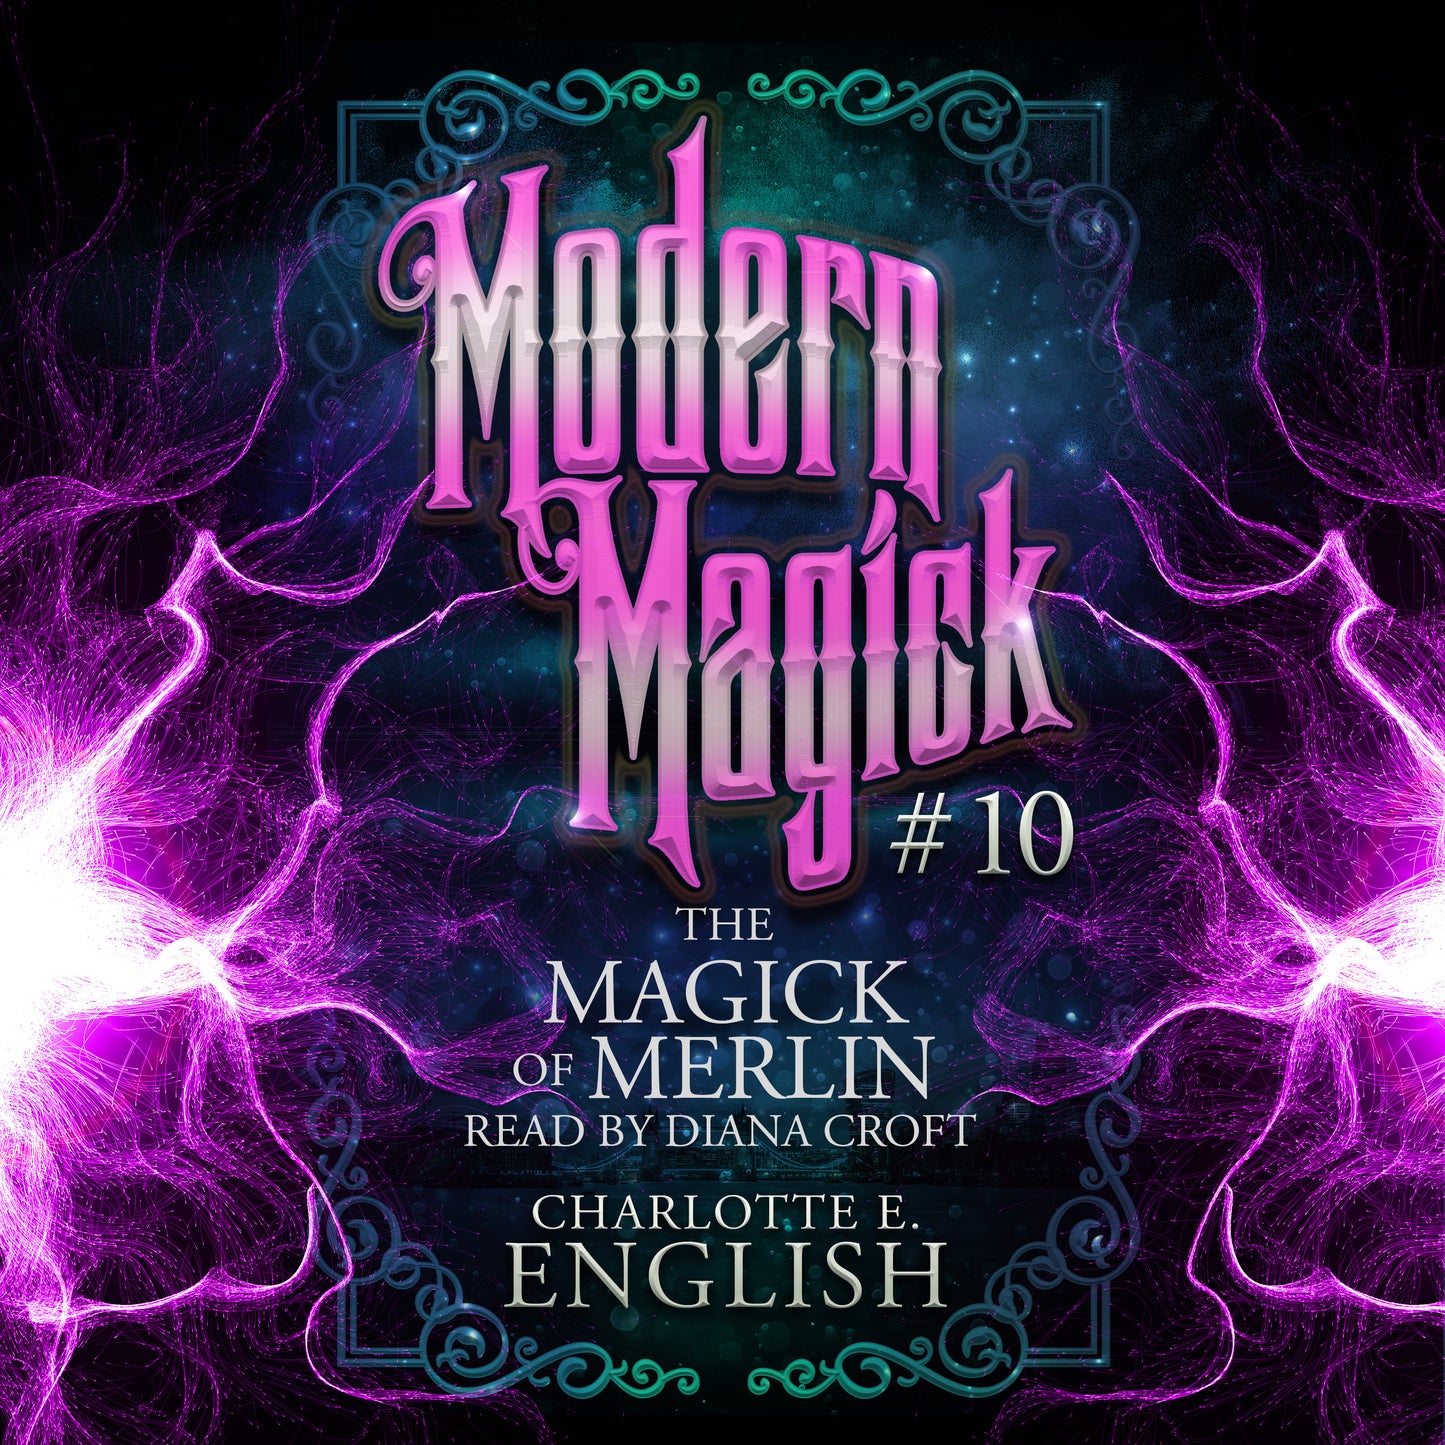 The Magick of Merlin